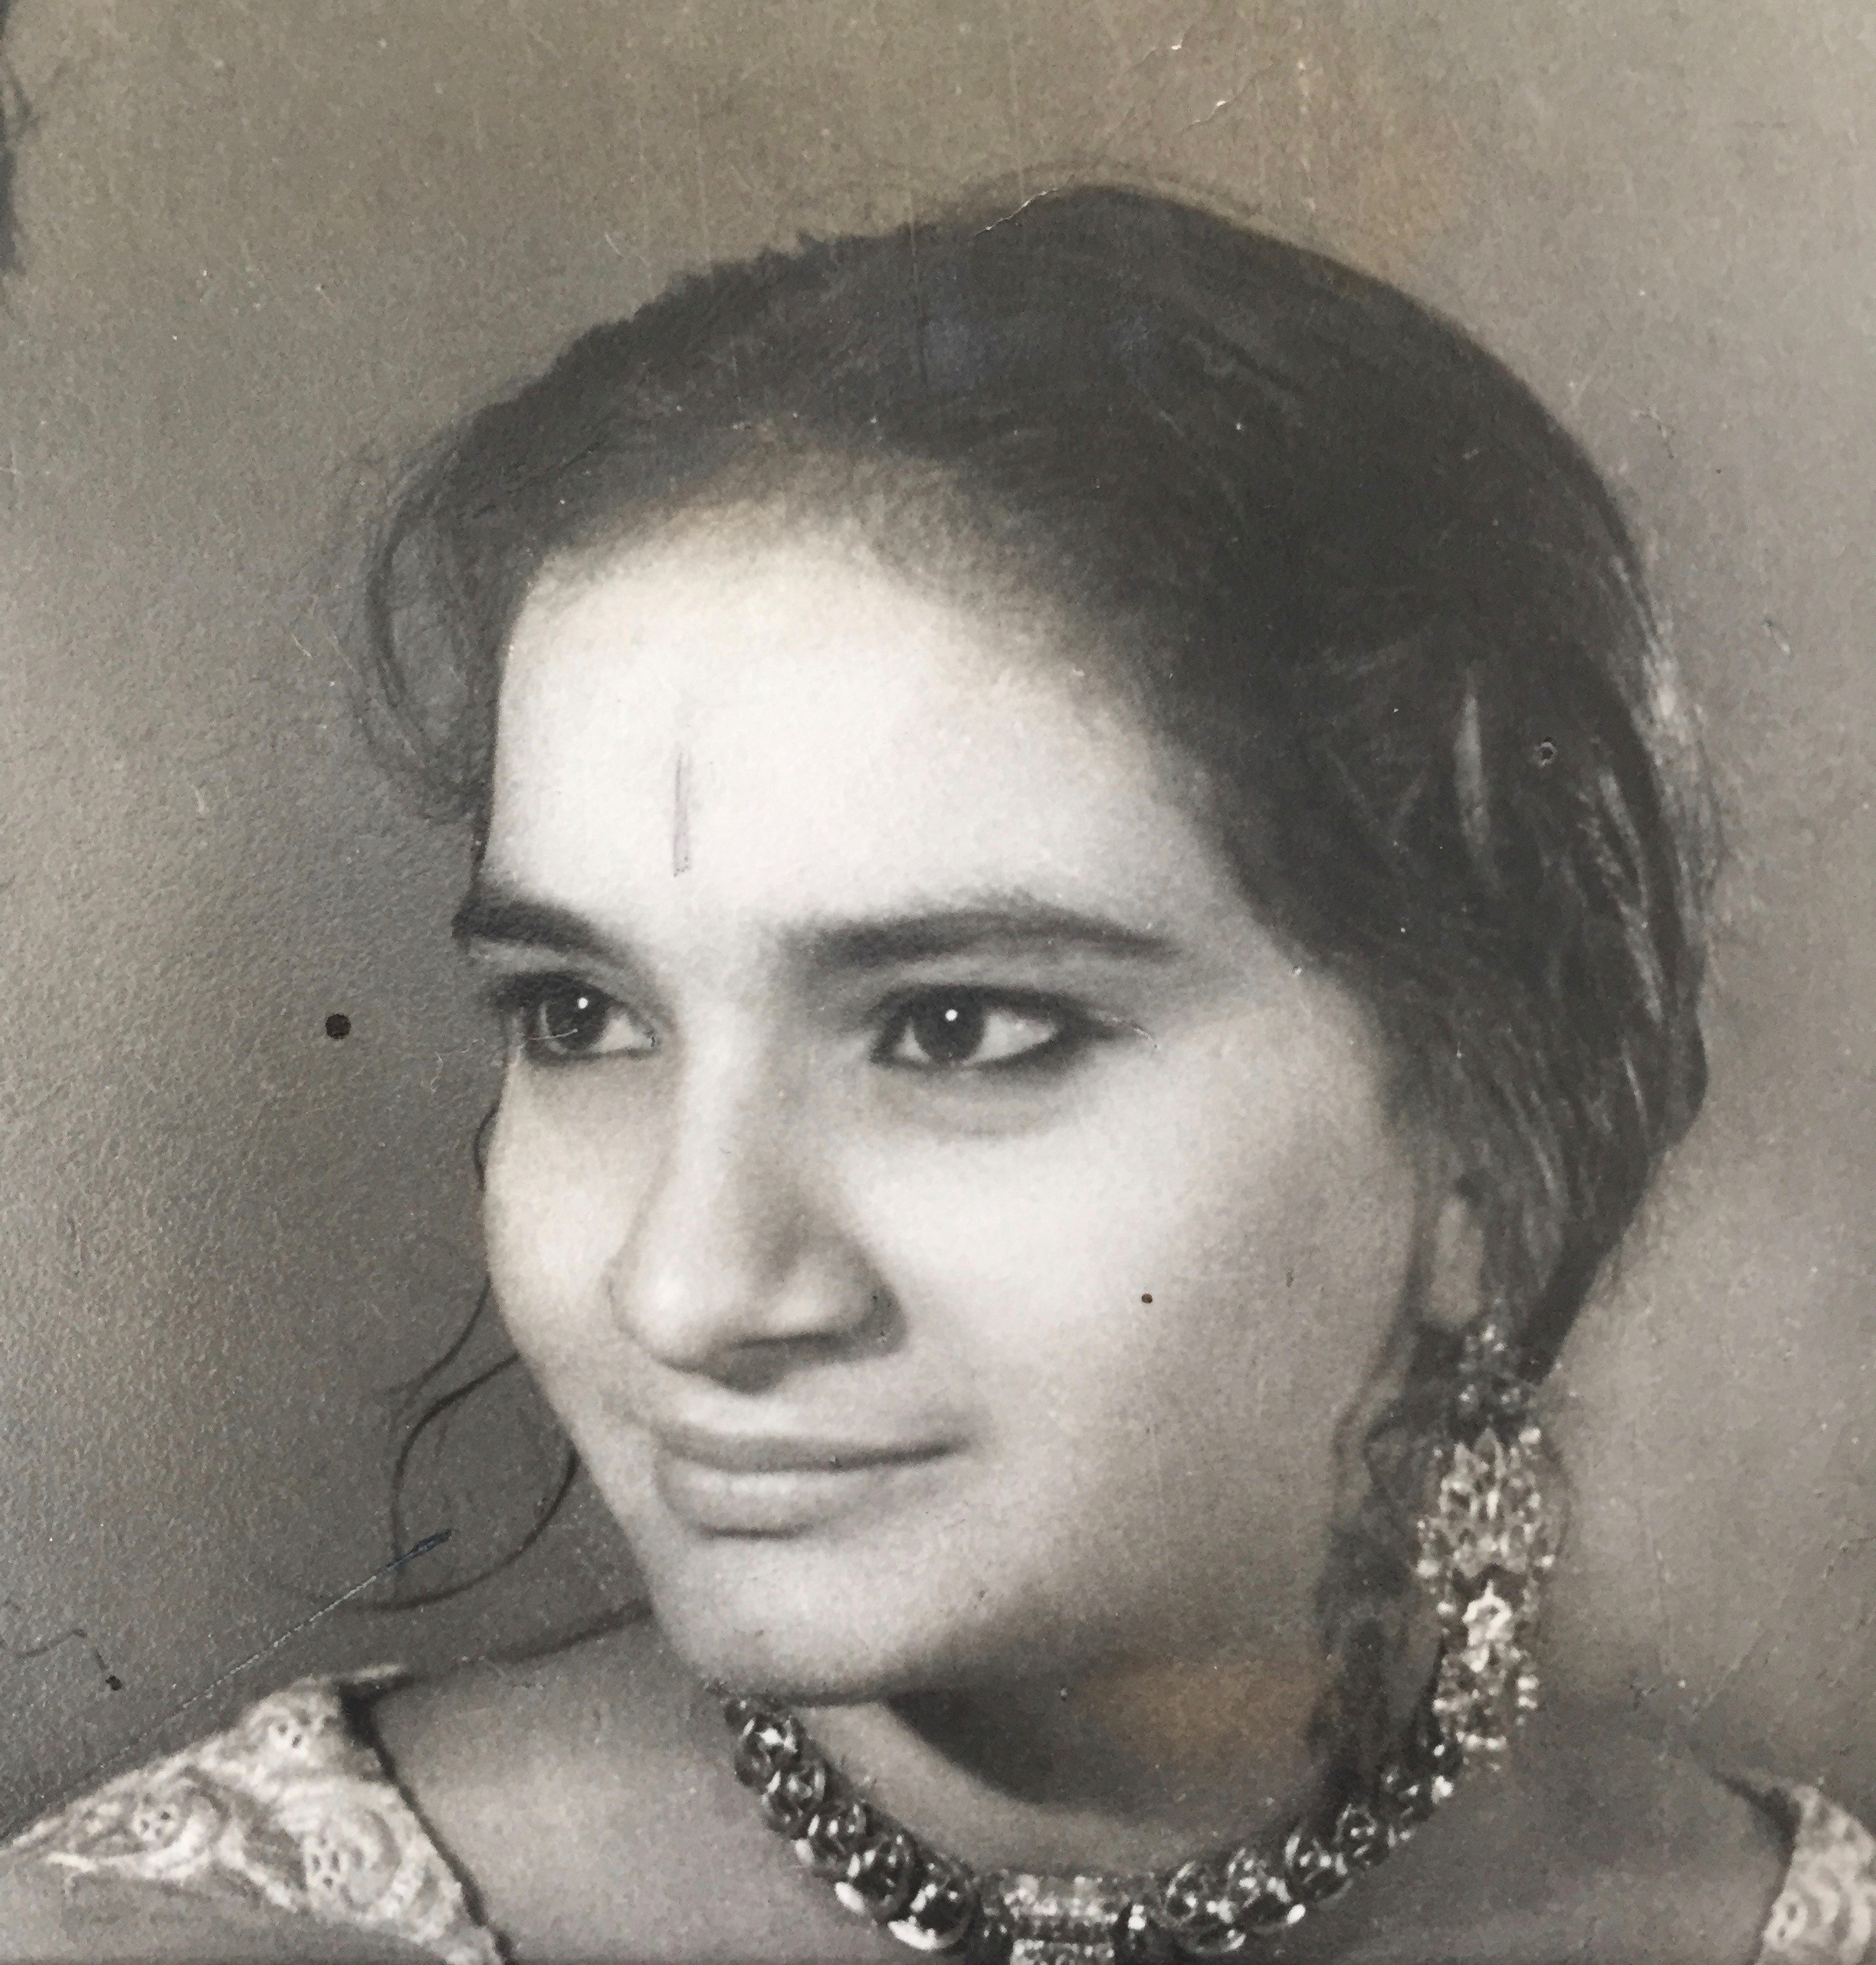 Mohinder Chadha in 1965.